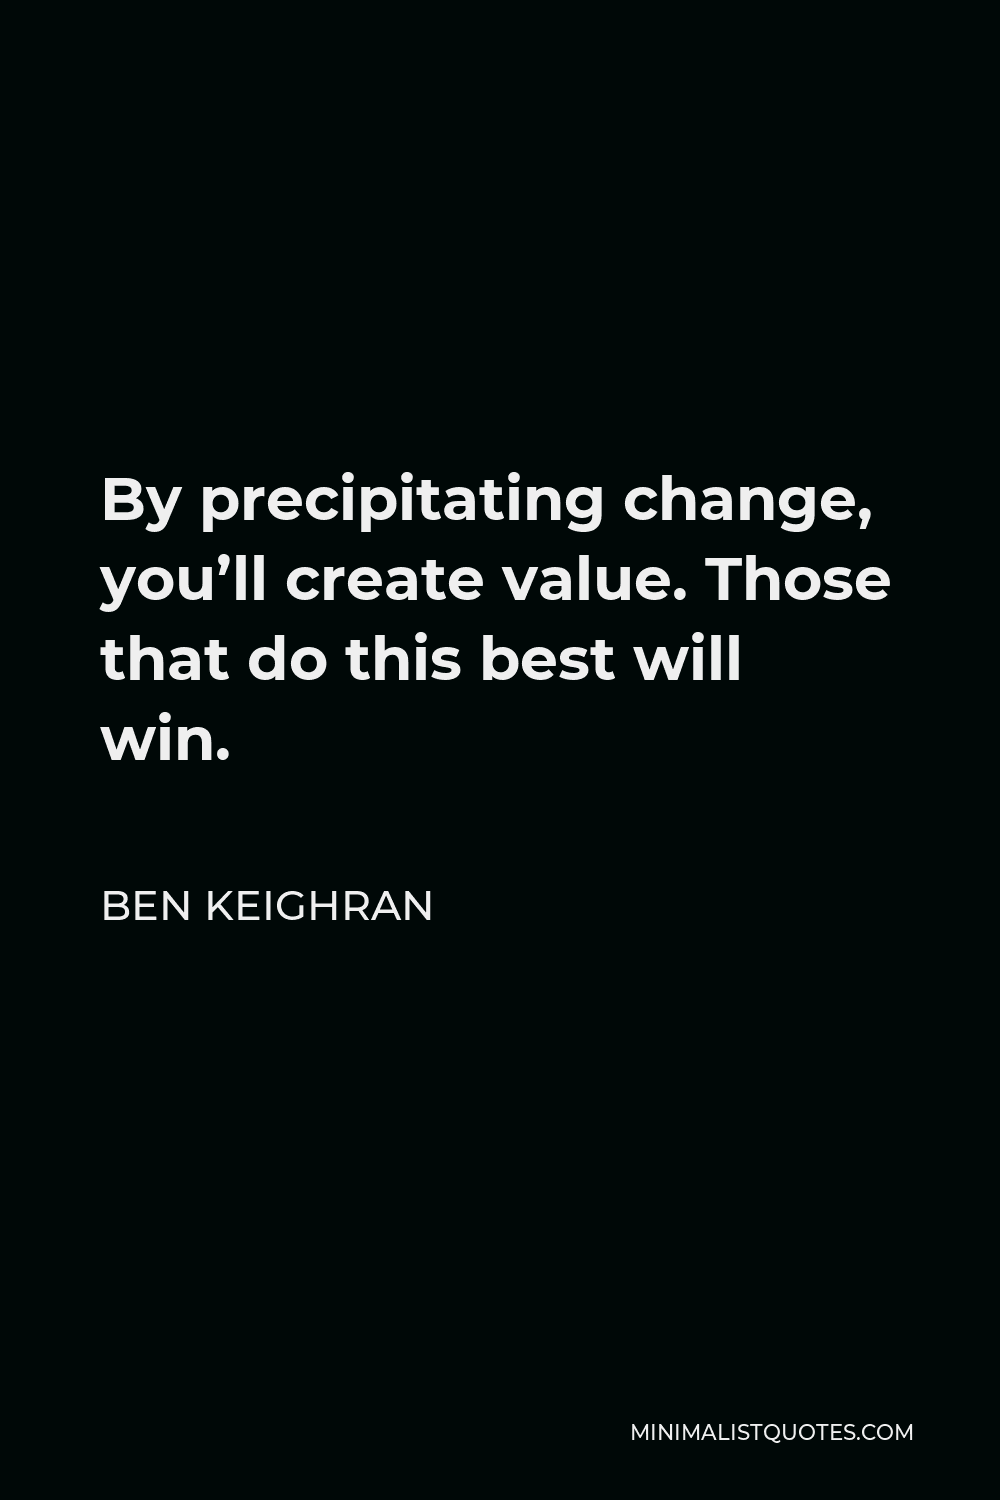 Ben Keighran Quote - By precipitating change, you’ll create value. Those that do this best will win.